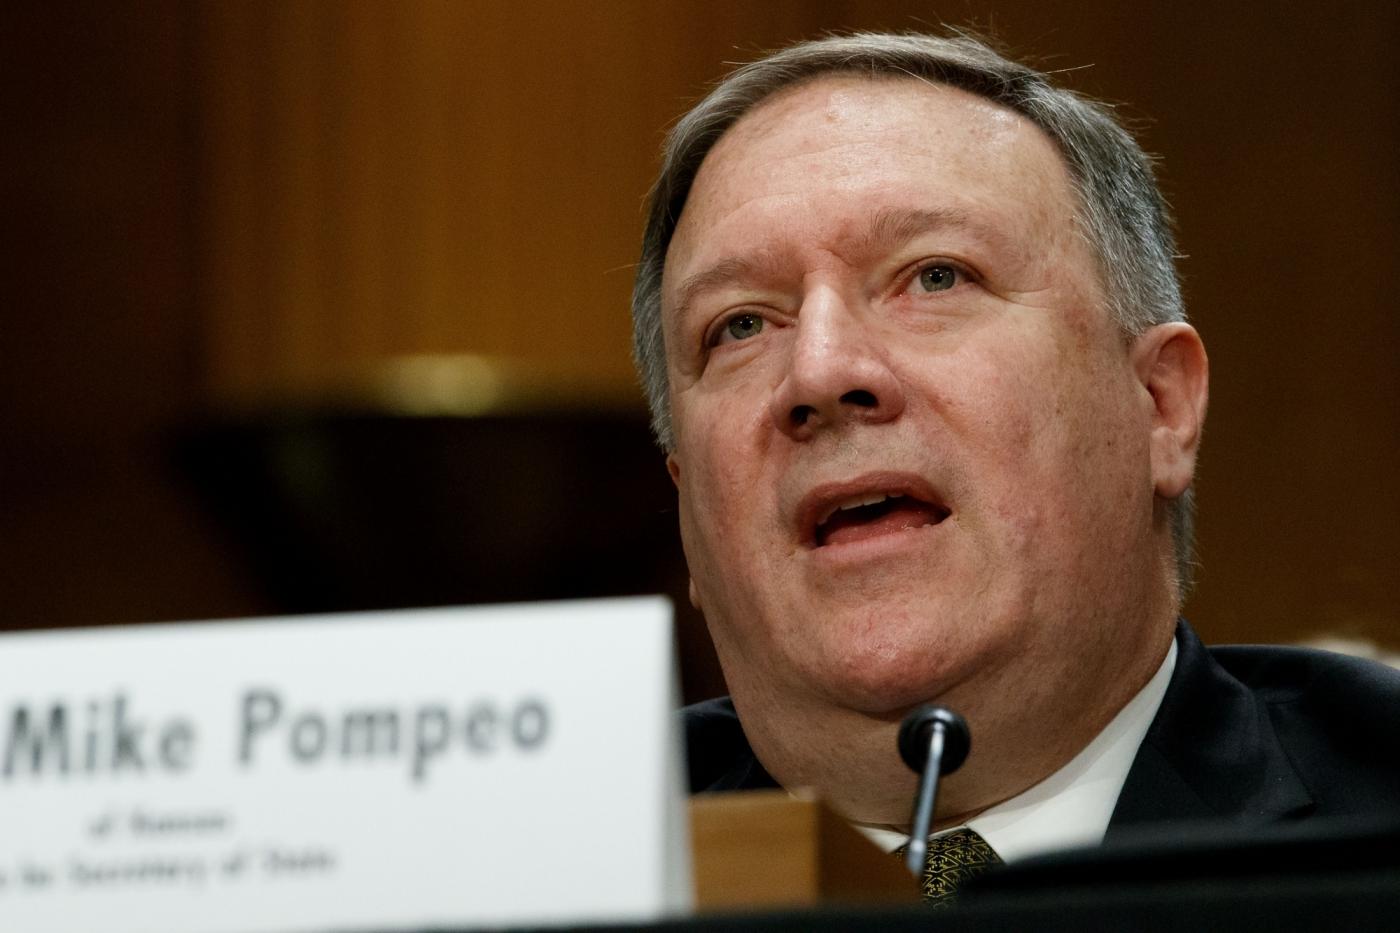 WASHINGTON, April 26, 2018 (Xinhua) -- File photo taken on April 12, 2018 shows that Mike Pompeo testifies before the Senate Foreign Relations Committee for his nomination to become the secretary of state on the Capitol Hill in Washington D.C., the United States. The U.S. Senate on April 26 narrowly confirmed Mike Pompeo as the new secretary of state to replace Rex Tillerson. (Xinhua/Ting Shen/IANS) by . 